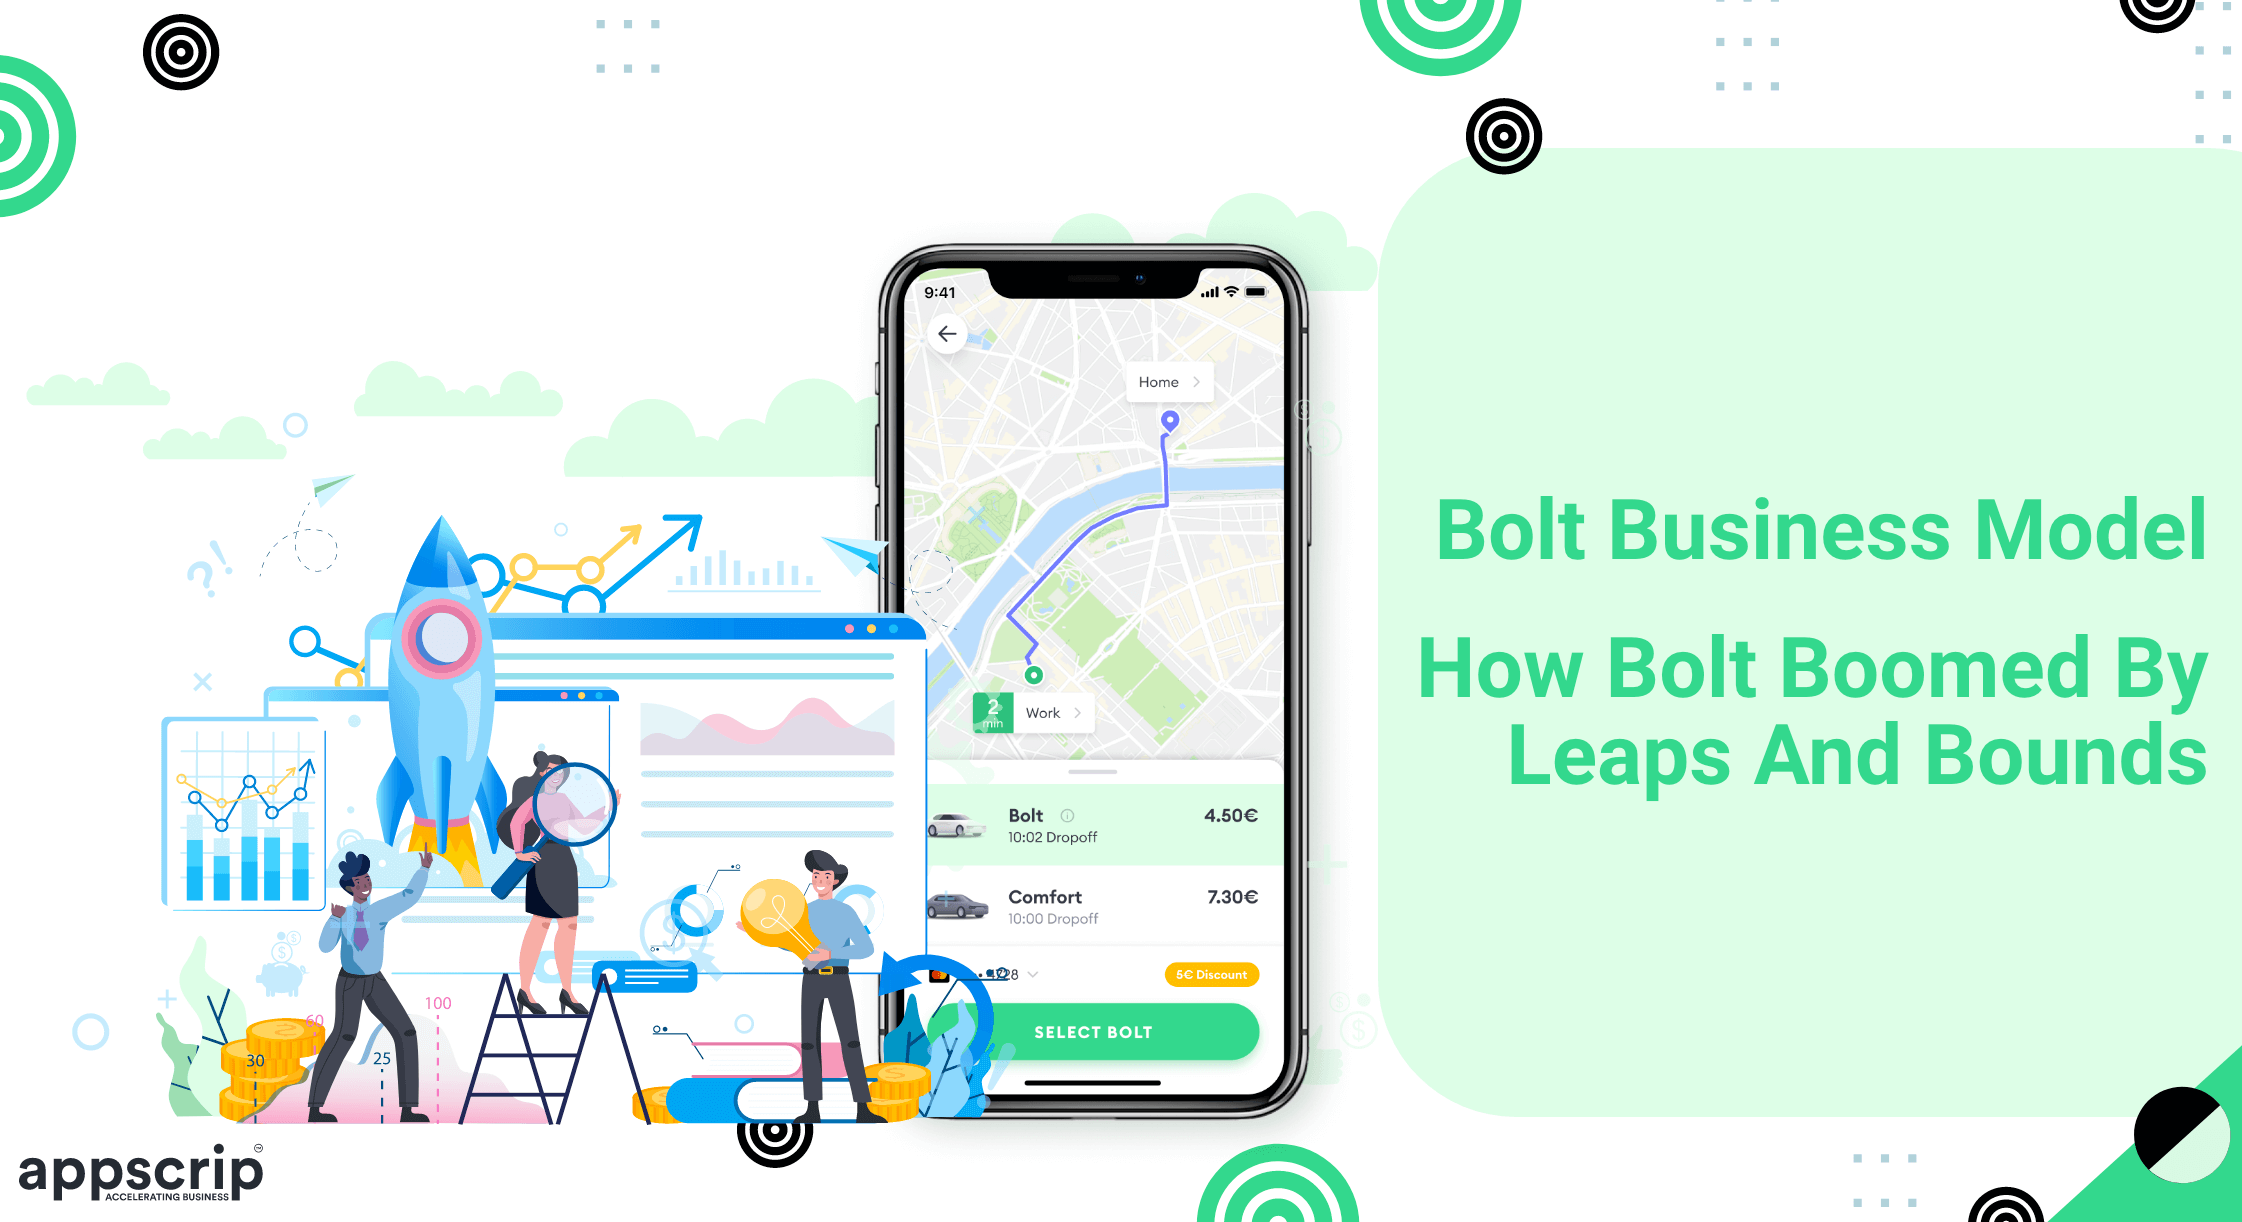 Bolt Business Model: How Bolt Boomed By Leaps And Bounds